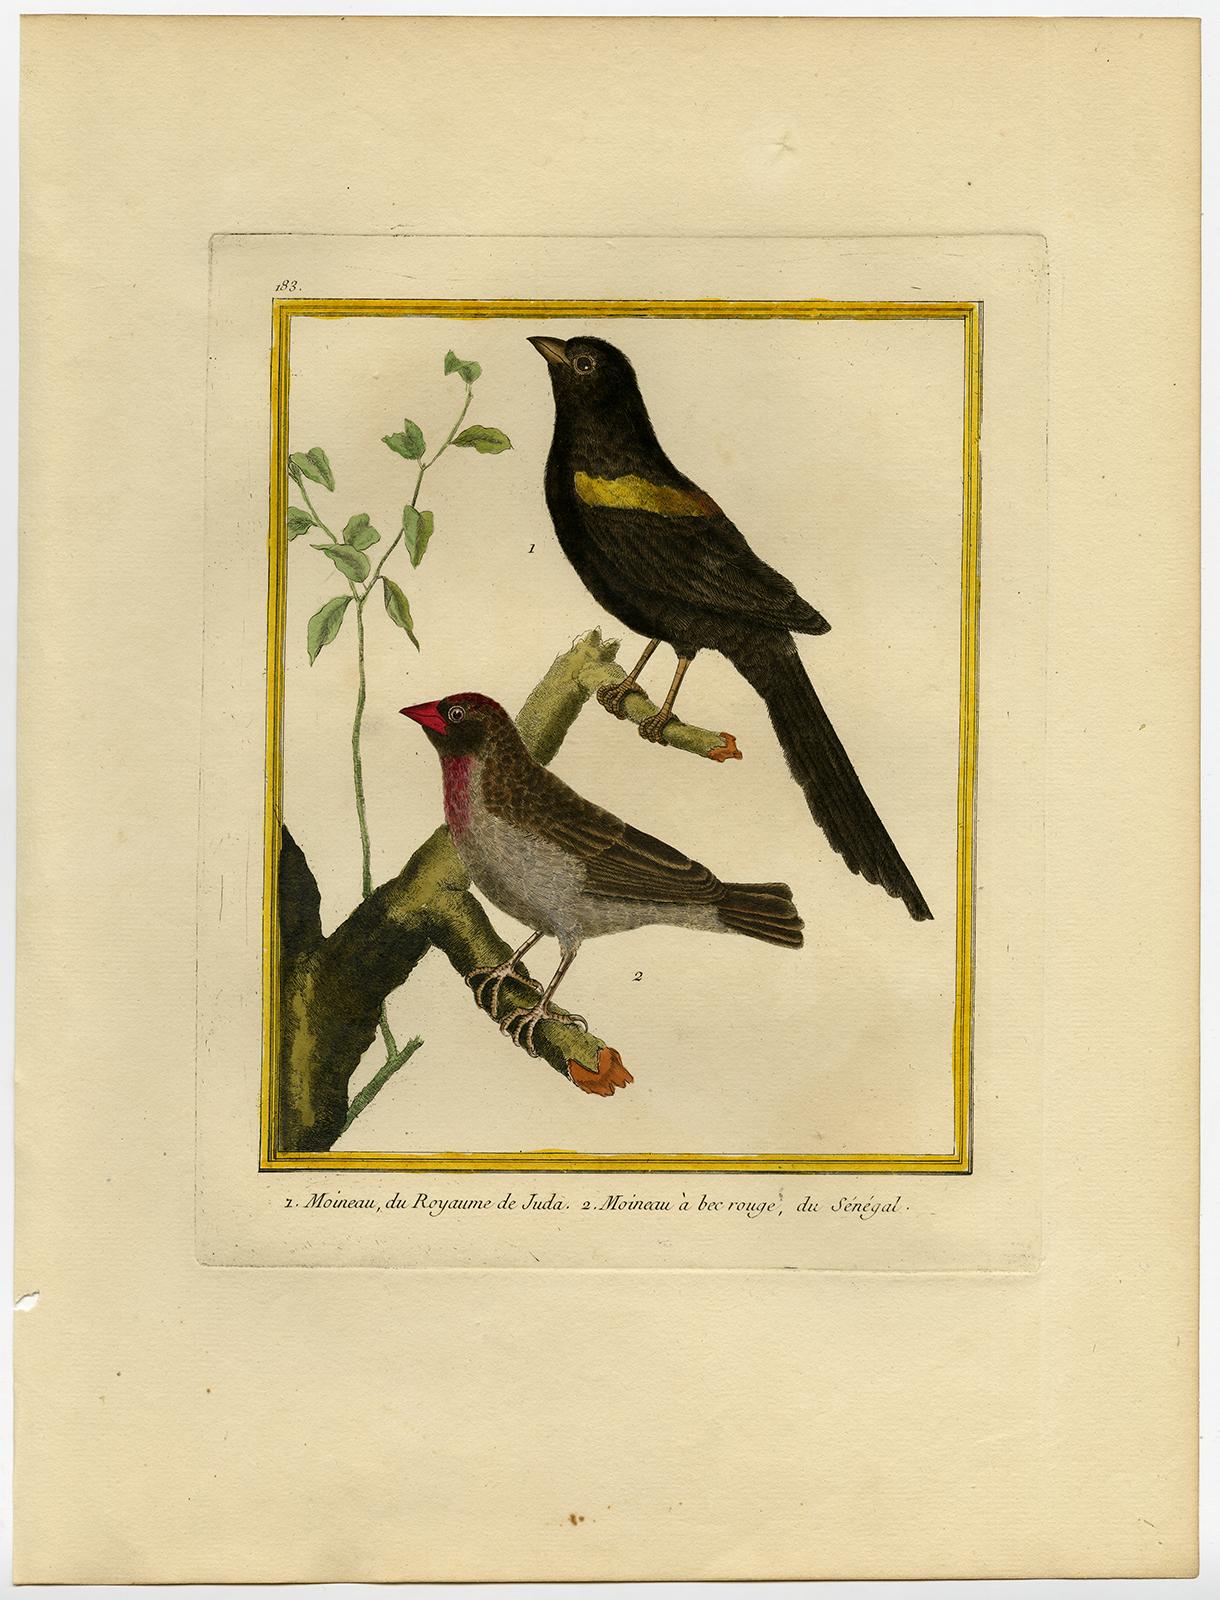 Thrushes of Juda and Senegal by Martinet - Handcoloured engraving - 18th century - Print by Francois Nicolas Martinet